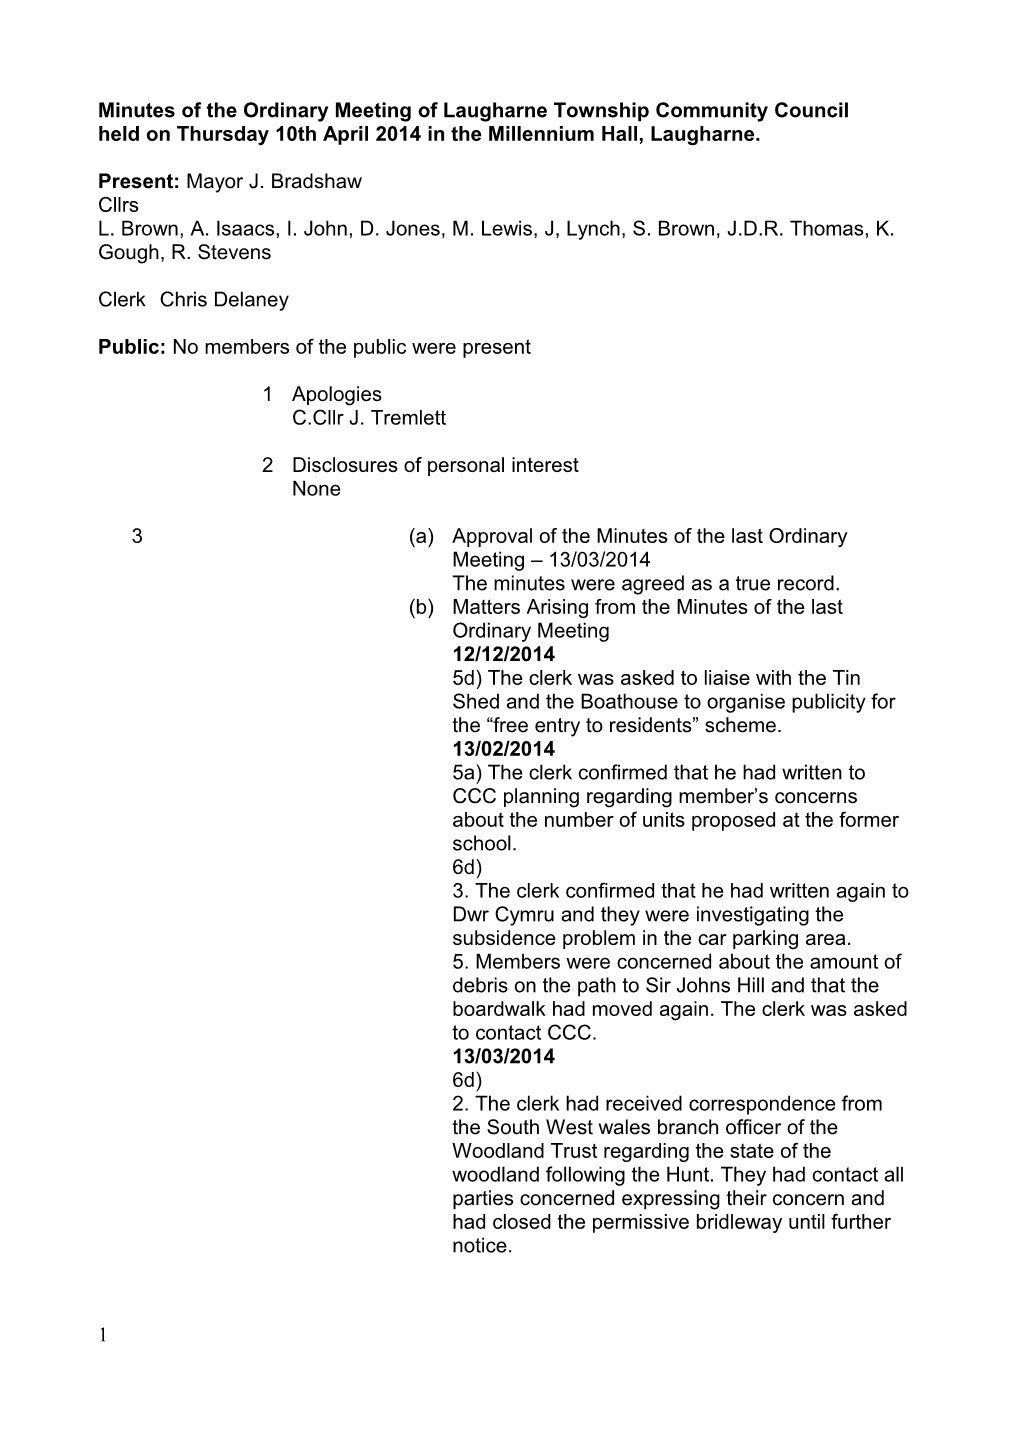 Minutes of the Ordinary Meeting of Laugharne Township Community Council